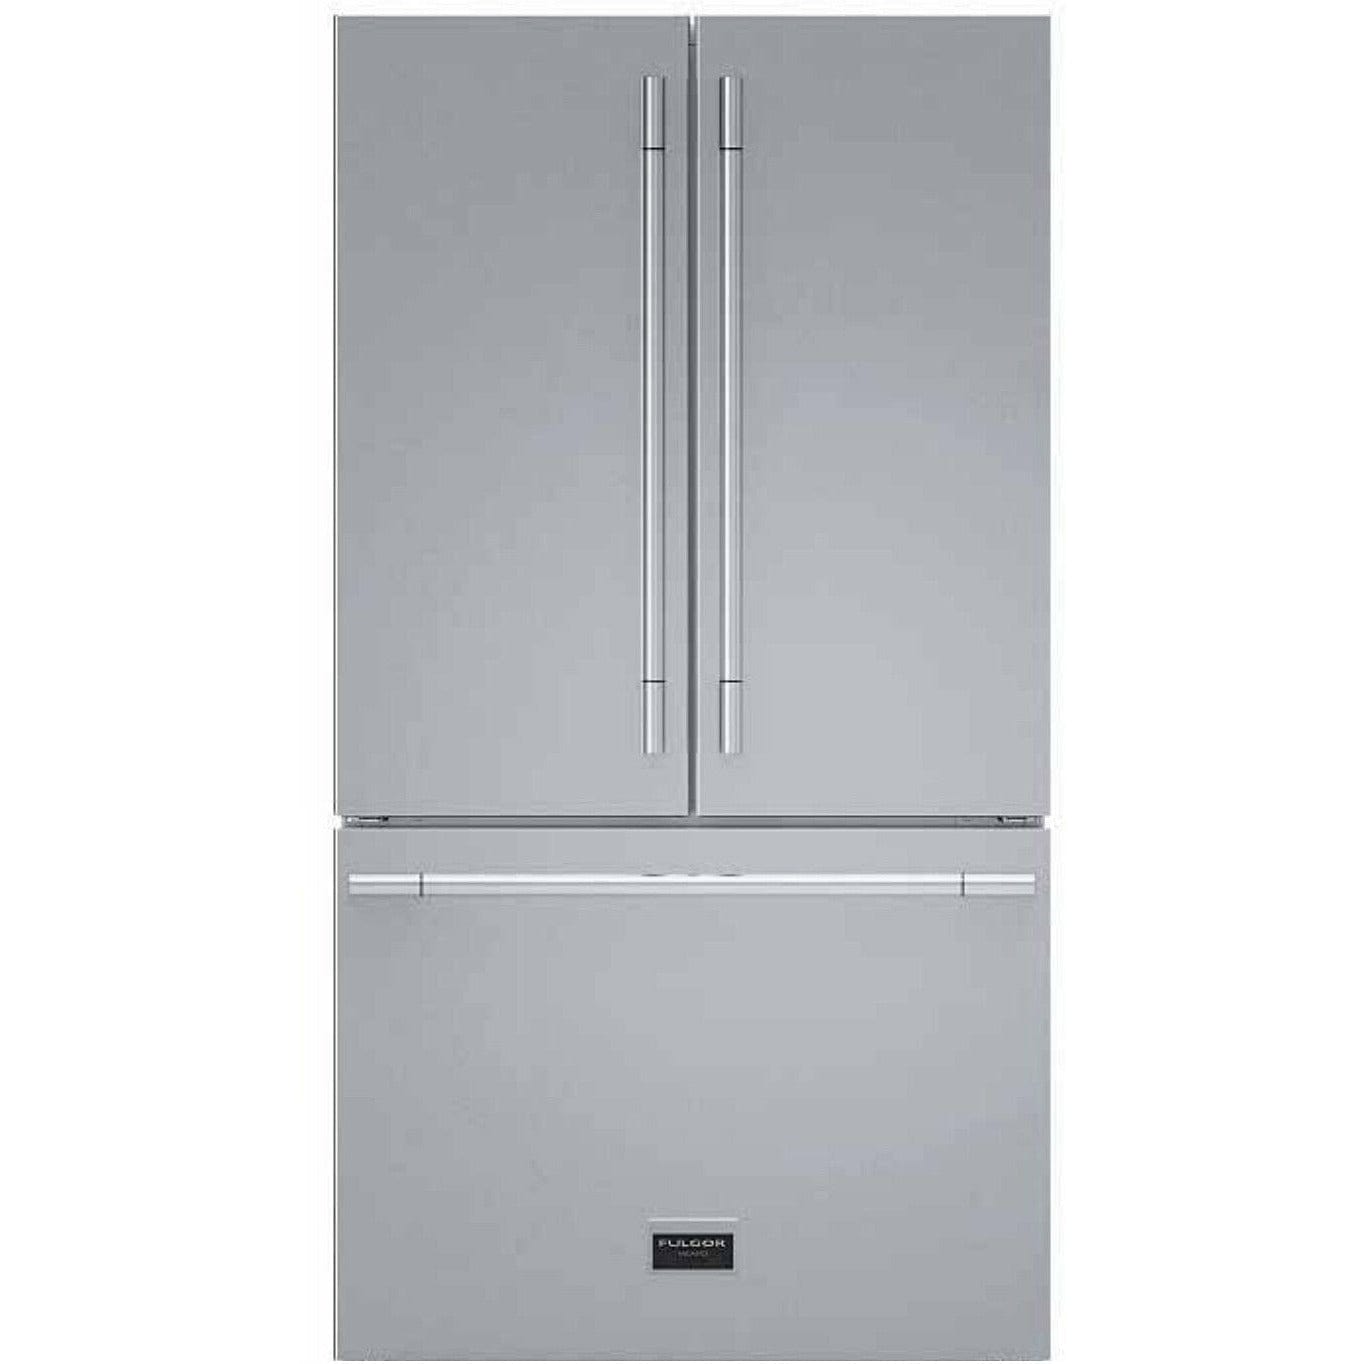 Fulgor Milano Package 30" Induction Range, 36" French Door Refrigerator, 24" Built-In Dishwasher and 30" Wall Mount Hood Ranges F6PIR304S1F6FBM36S2 Luxury Appliances Direct